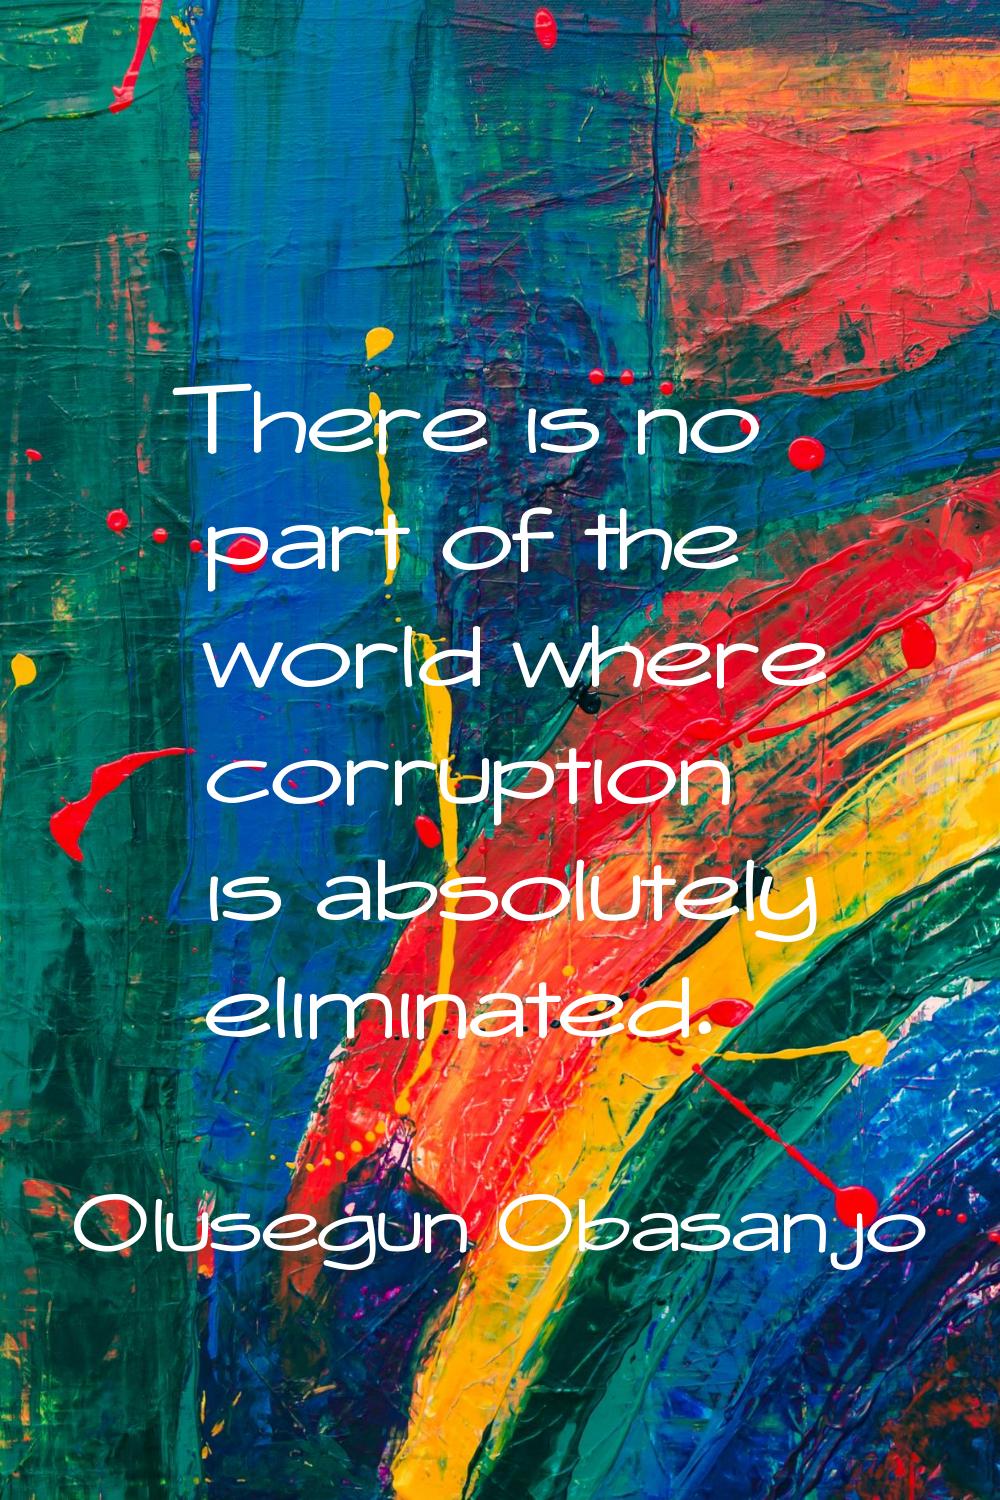 There is no part of the world where corruption is absolutely eliminated.